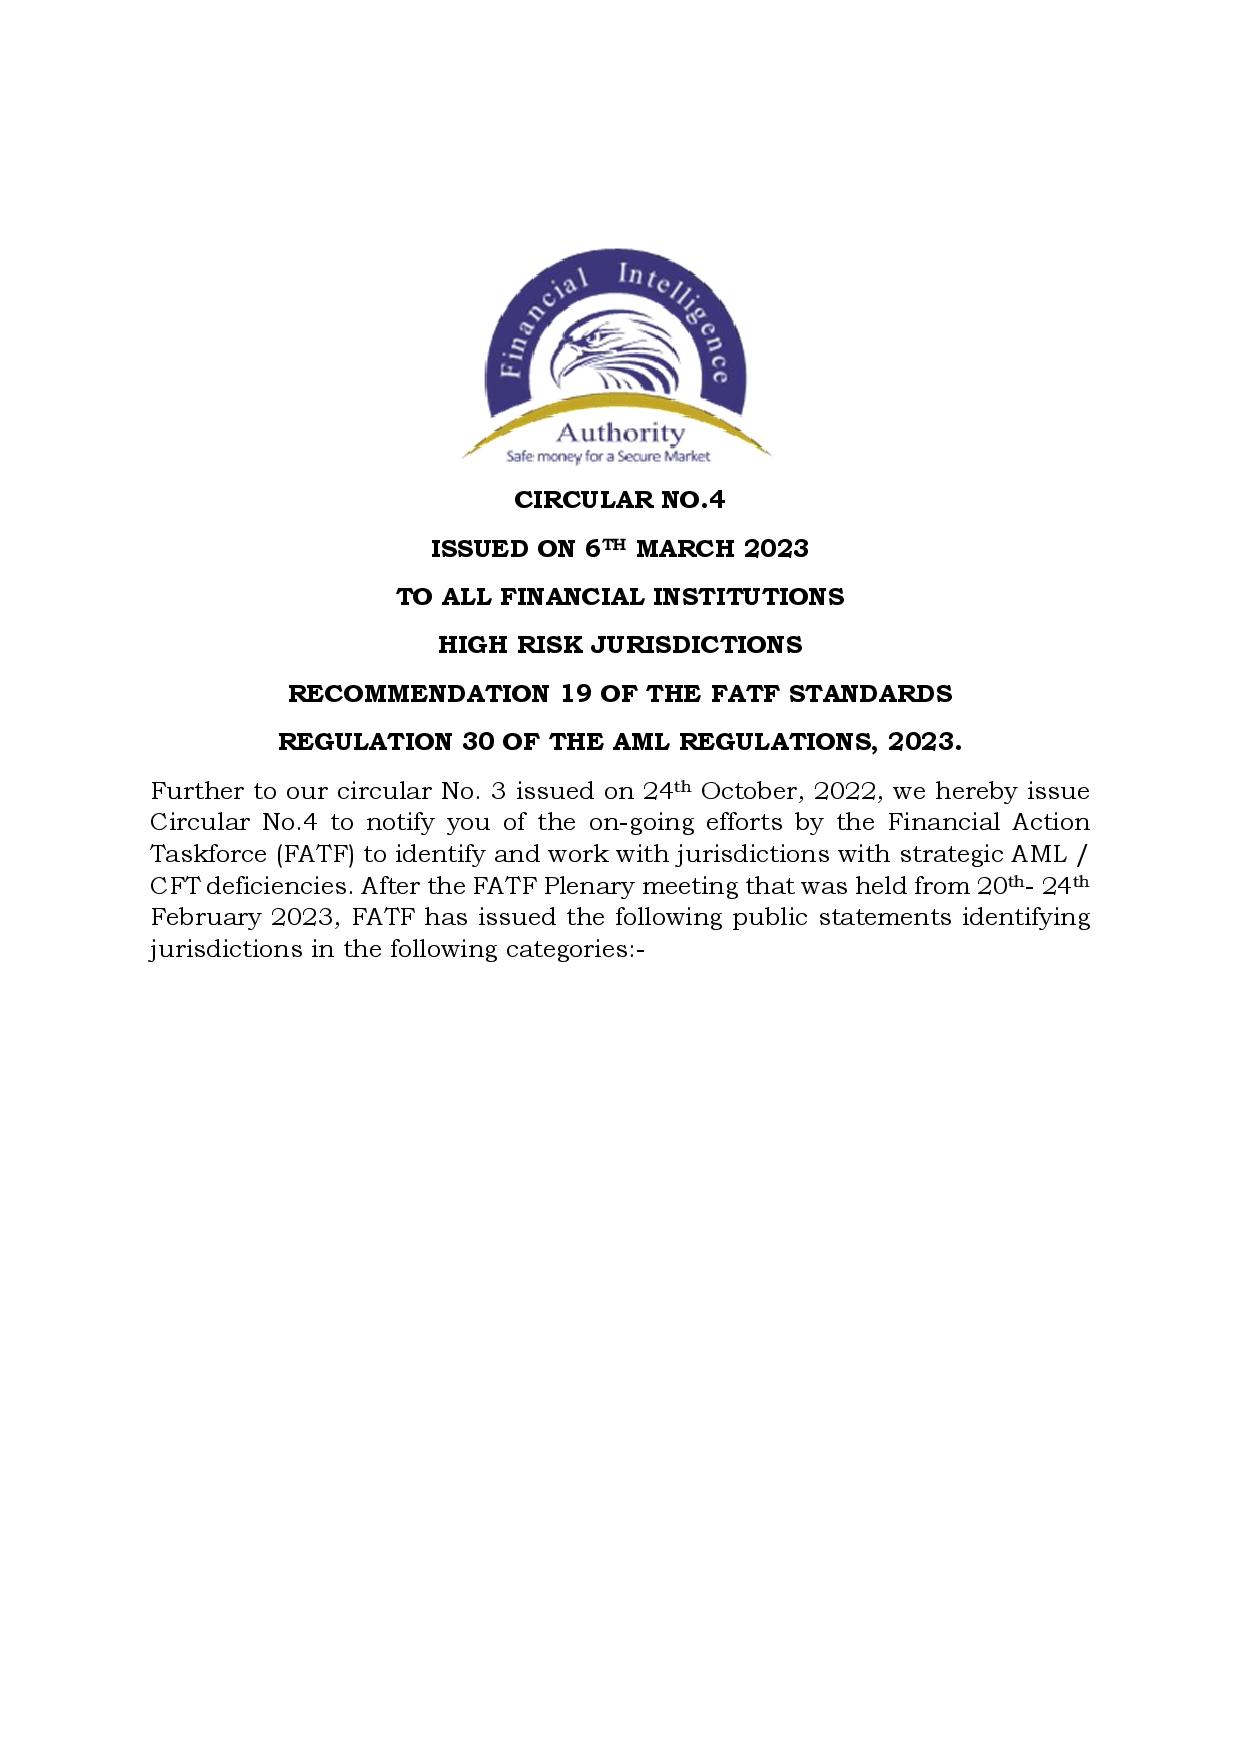 Circular No.4 Issued 6th March 2023